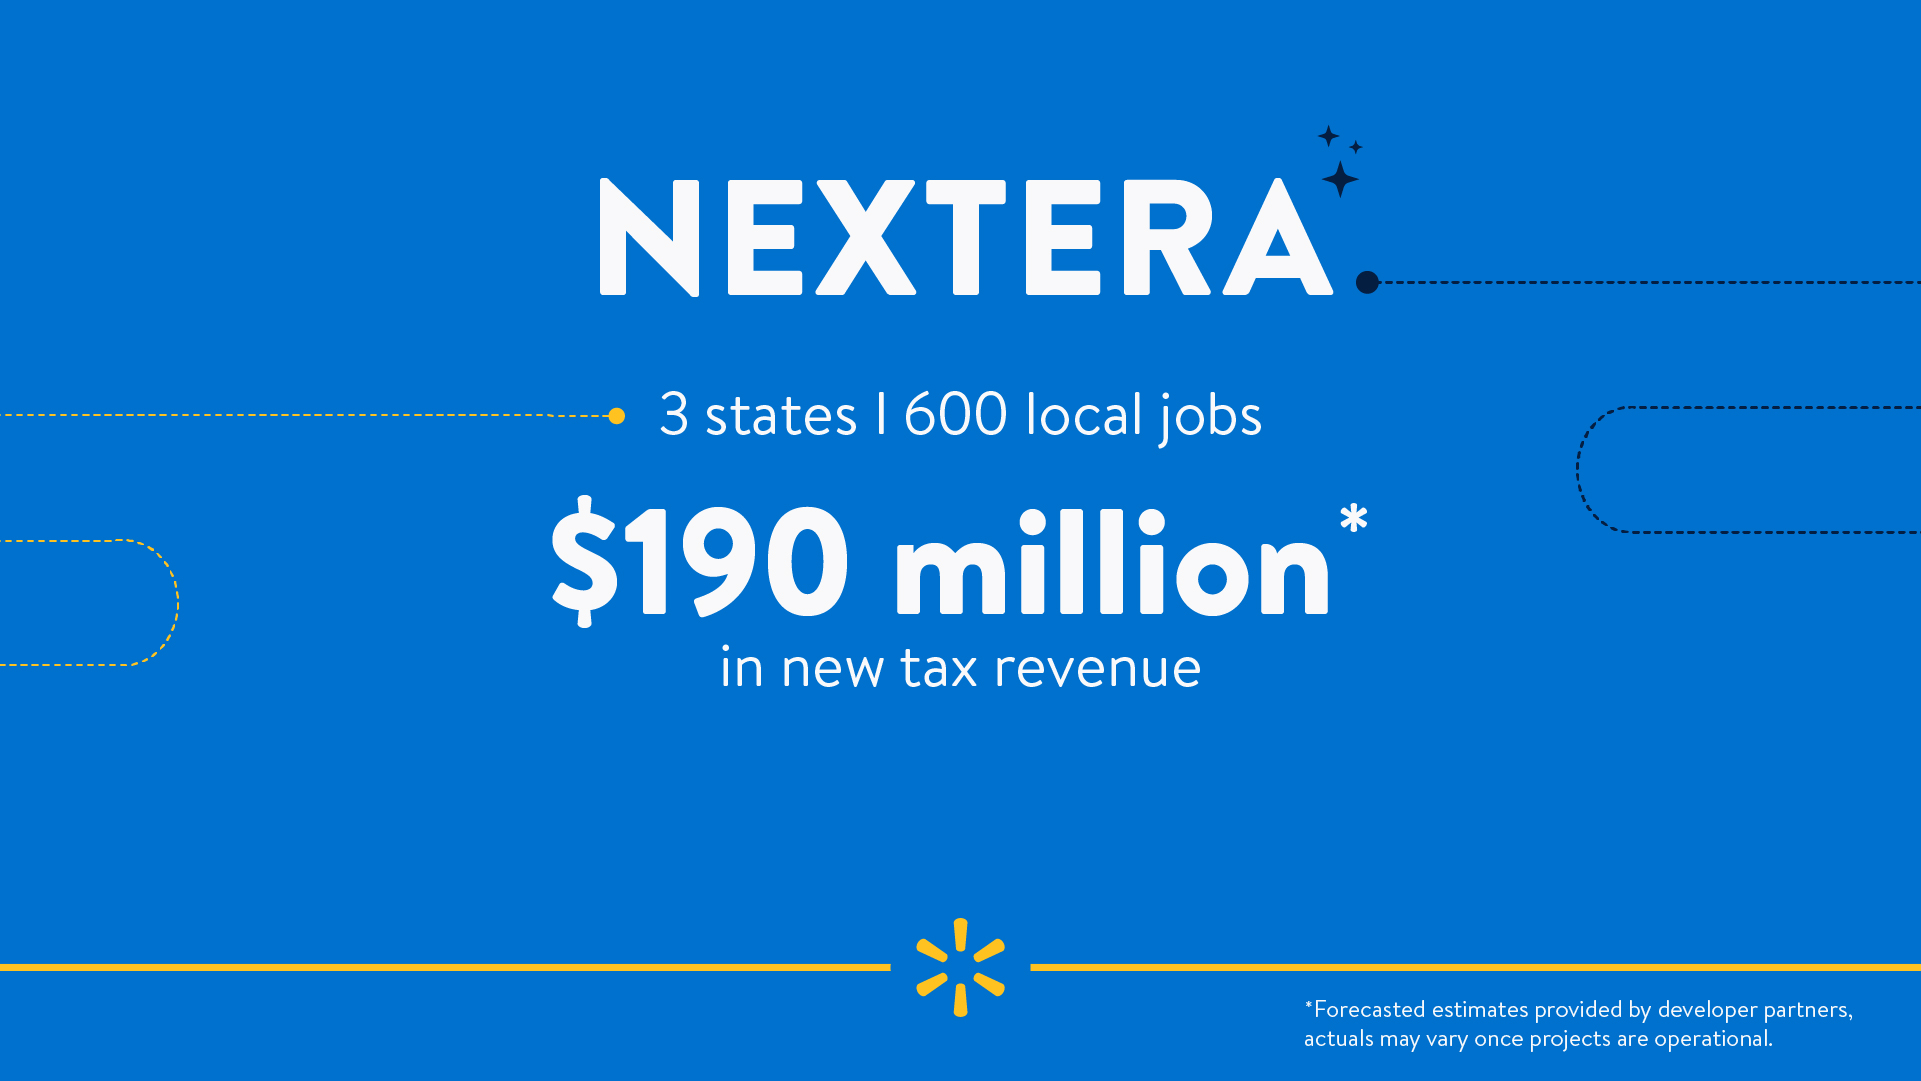 Image reads "Nextera. 3 states. 600 local jobs. $190 million* in new tax revenue. *Forecasted estimates provided by developer partners, actuals may vary once projects are operational."